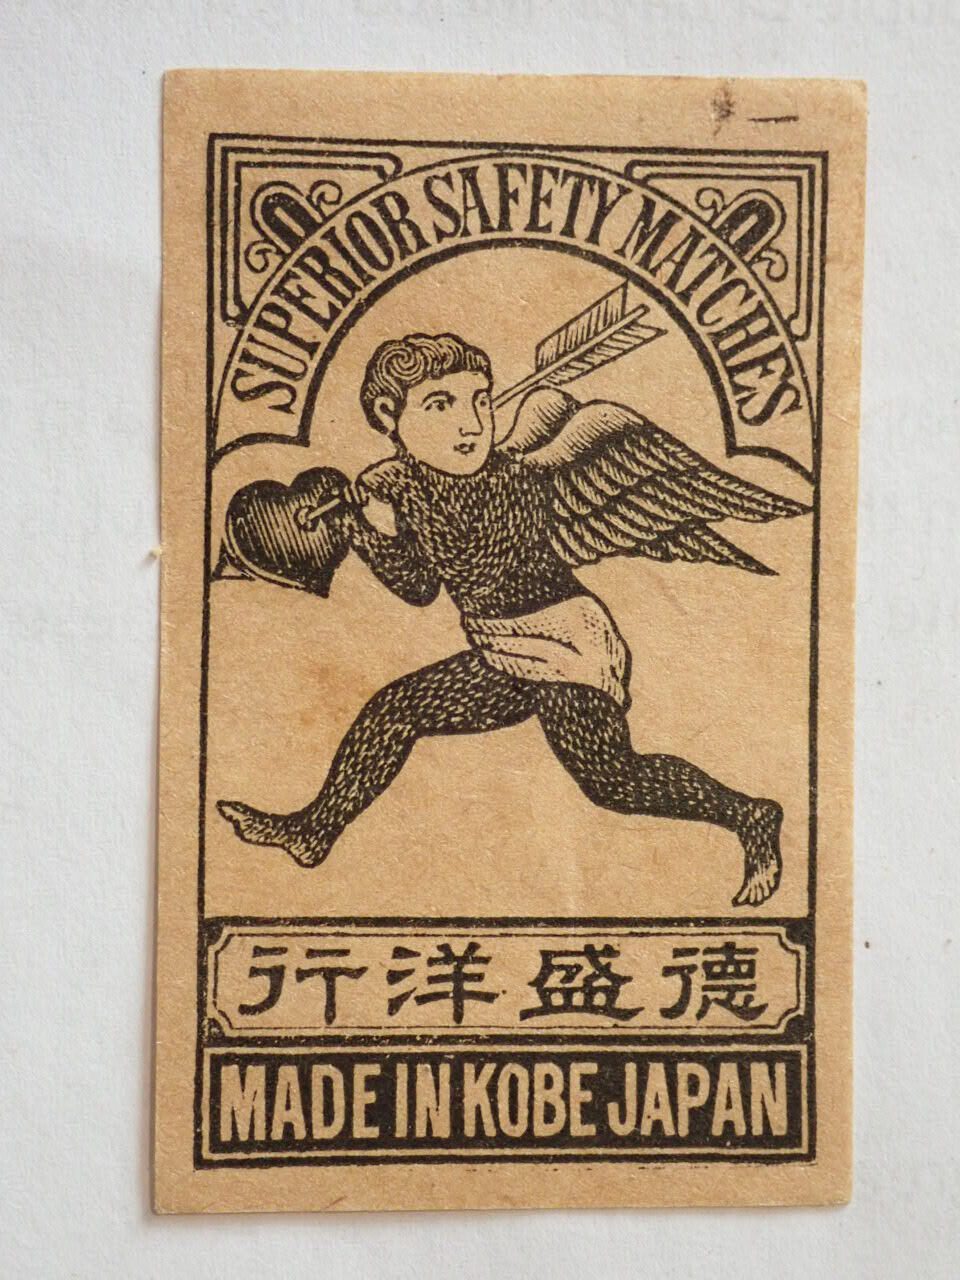 SUPERIOR SAFETY MATCHES MATCH BOX LABEL c1900s MADE in KOBE JAPAN CUPID & ARROW